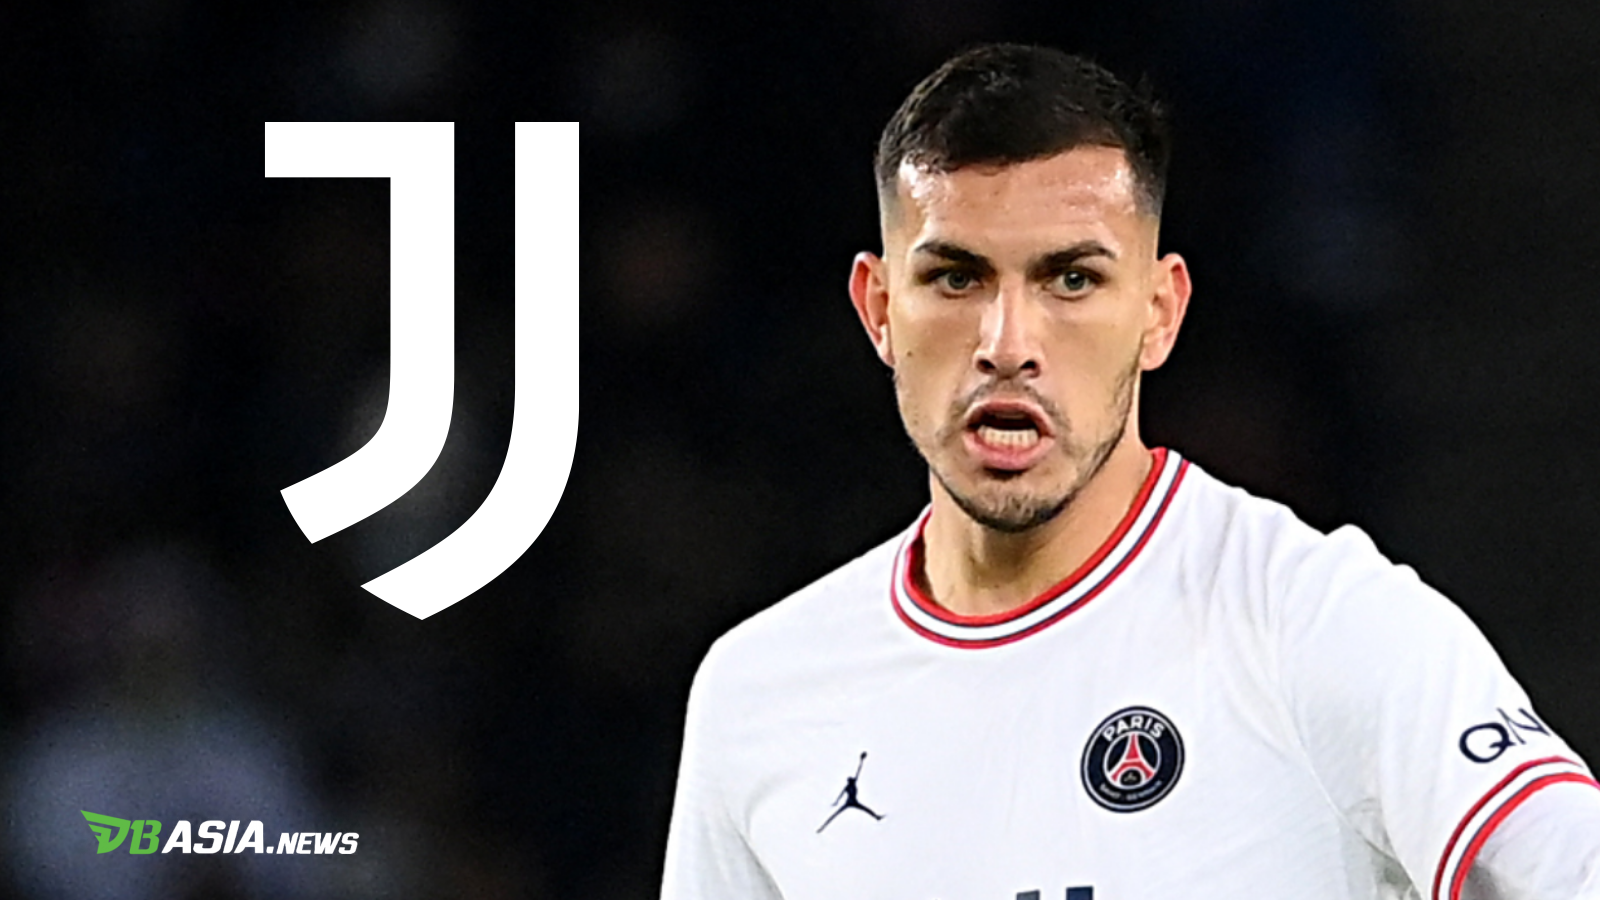 DBAsia News | Leandro Paredes Only Wants to Go to Juventus - DBAsia News